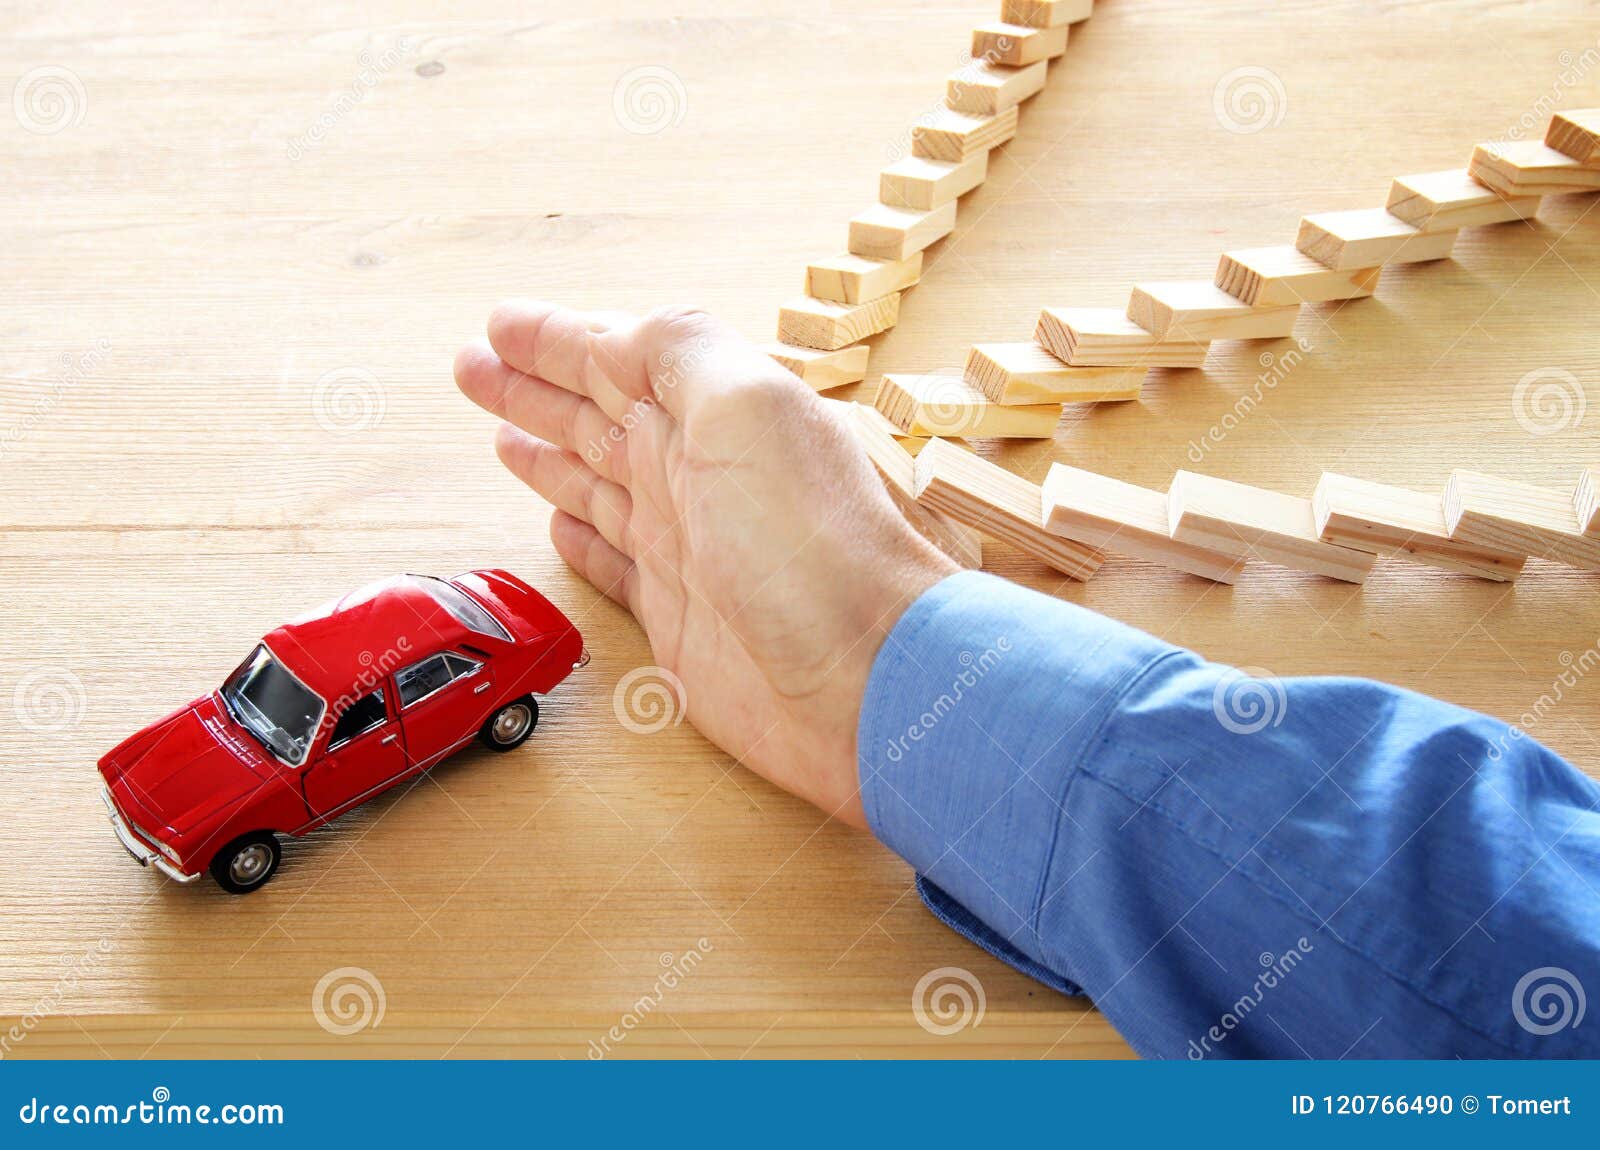  A hand stopping dominoes from falling with a red toy car behind them, representing car insurance protection.